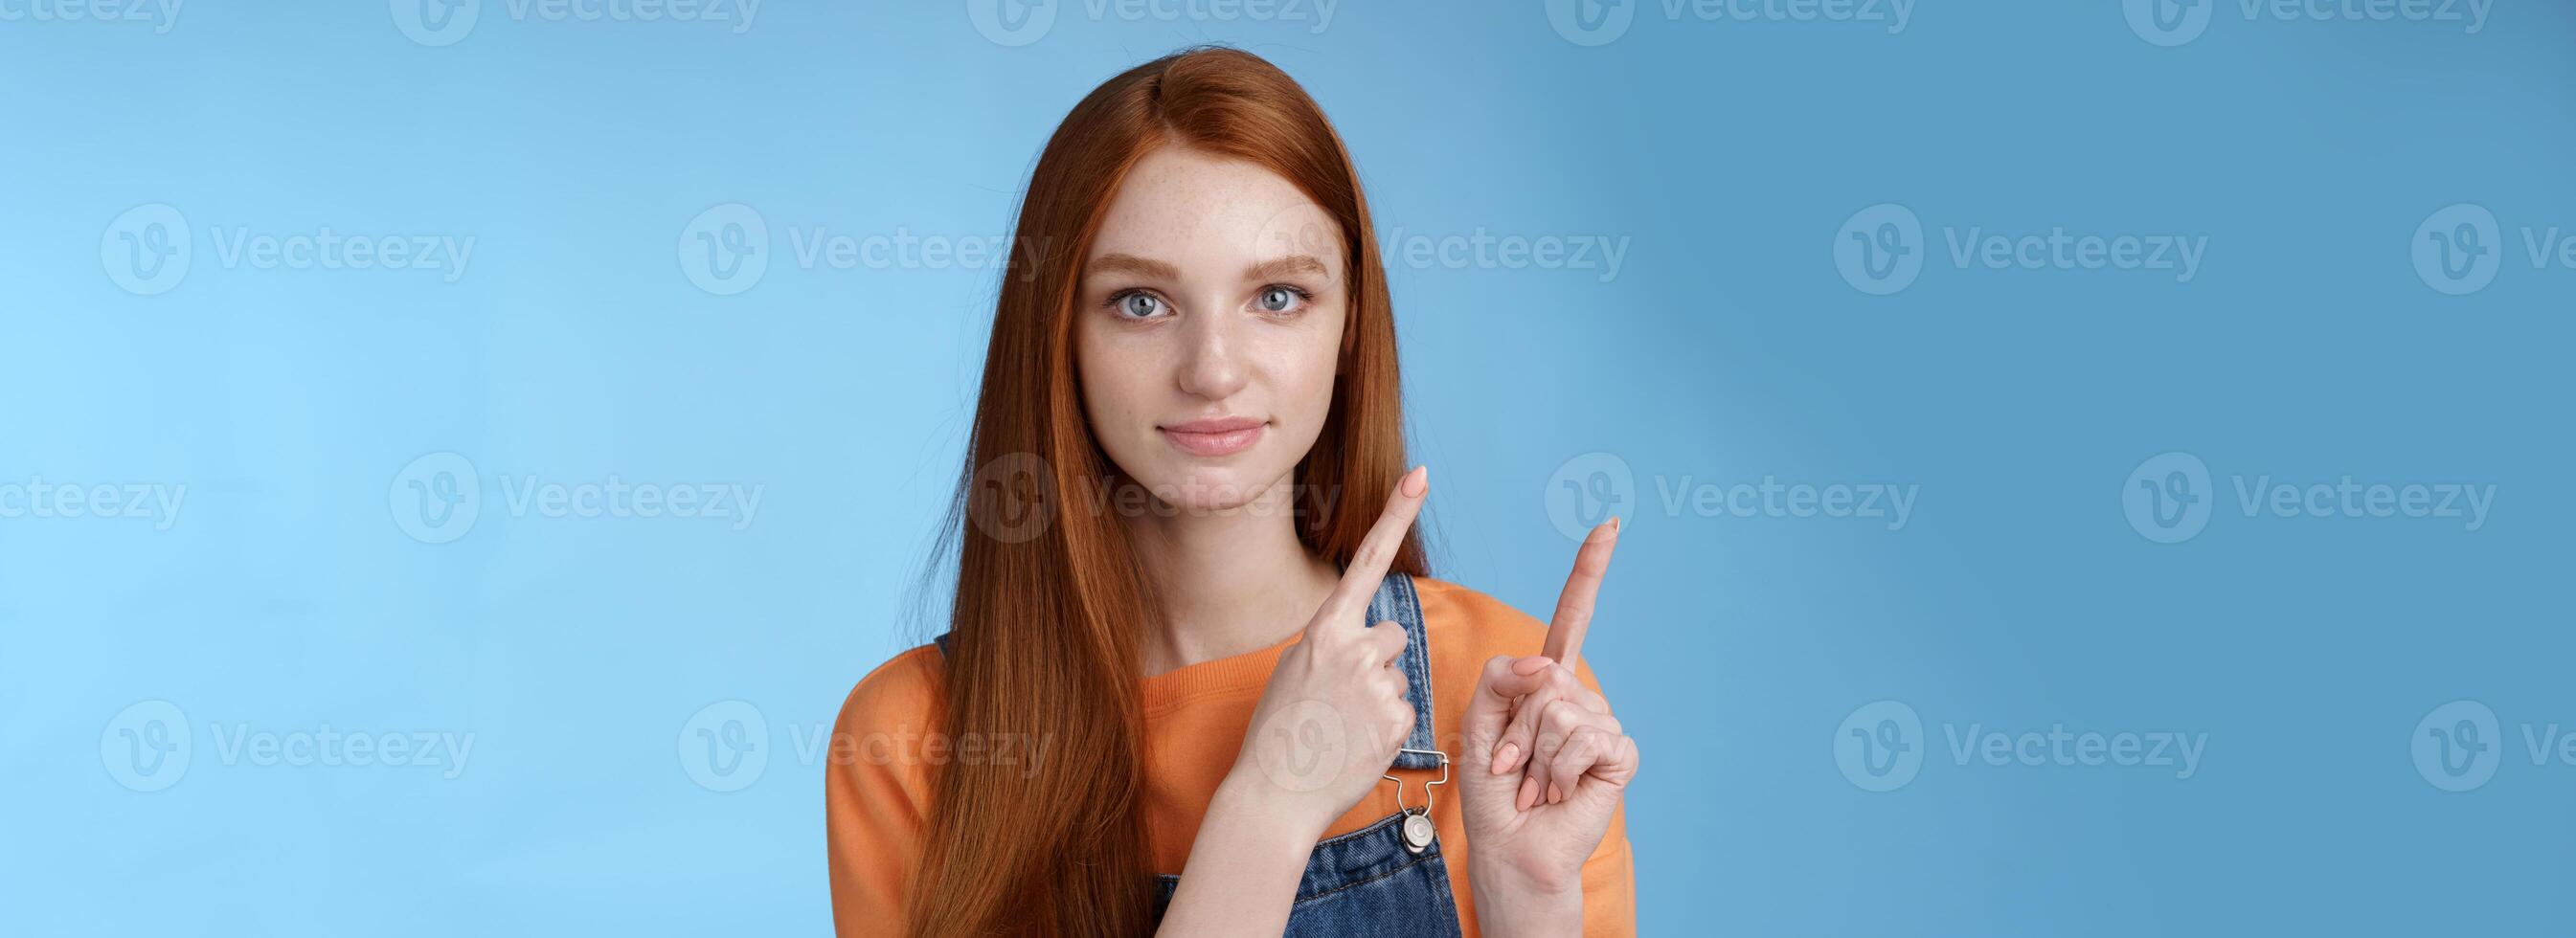 Assertive good-looking redhead girl know what talking about pointing upper left corner index fingers showing confidently good product recommend check out standing blue background photo